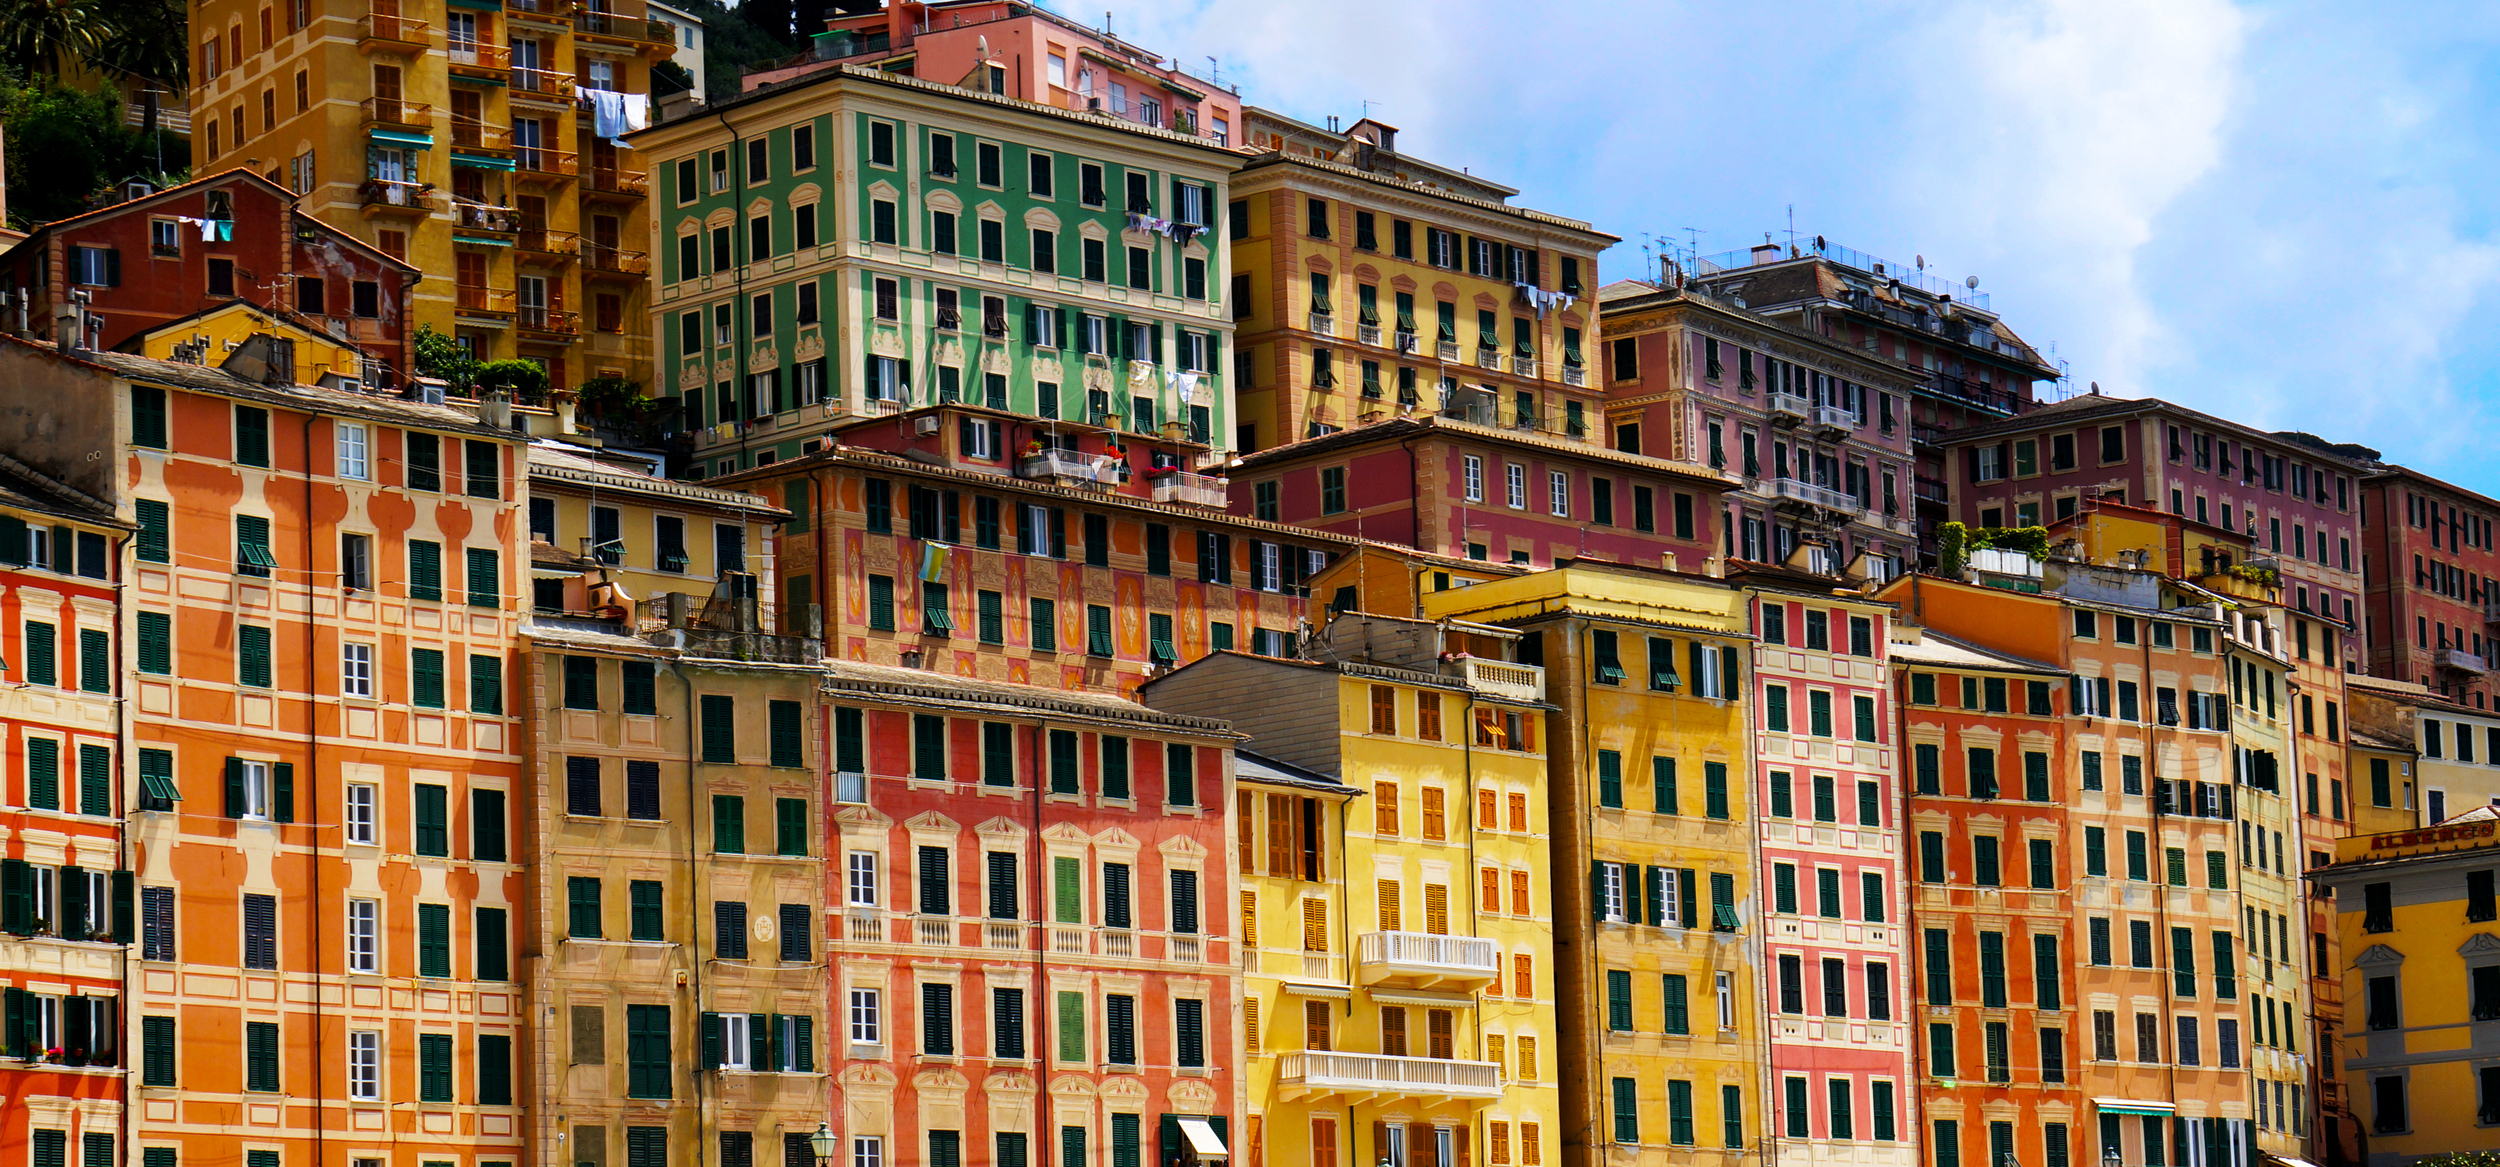 Houses on the hillside in Cinque Terre